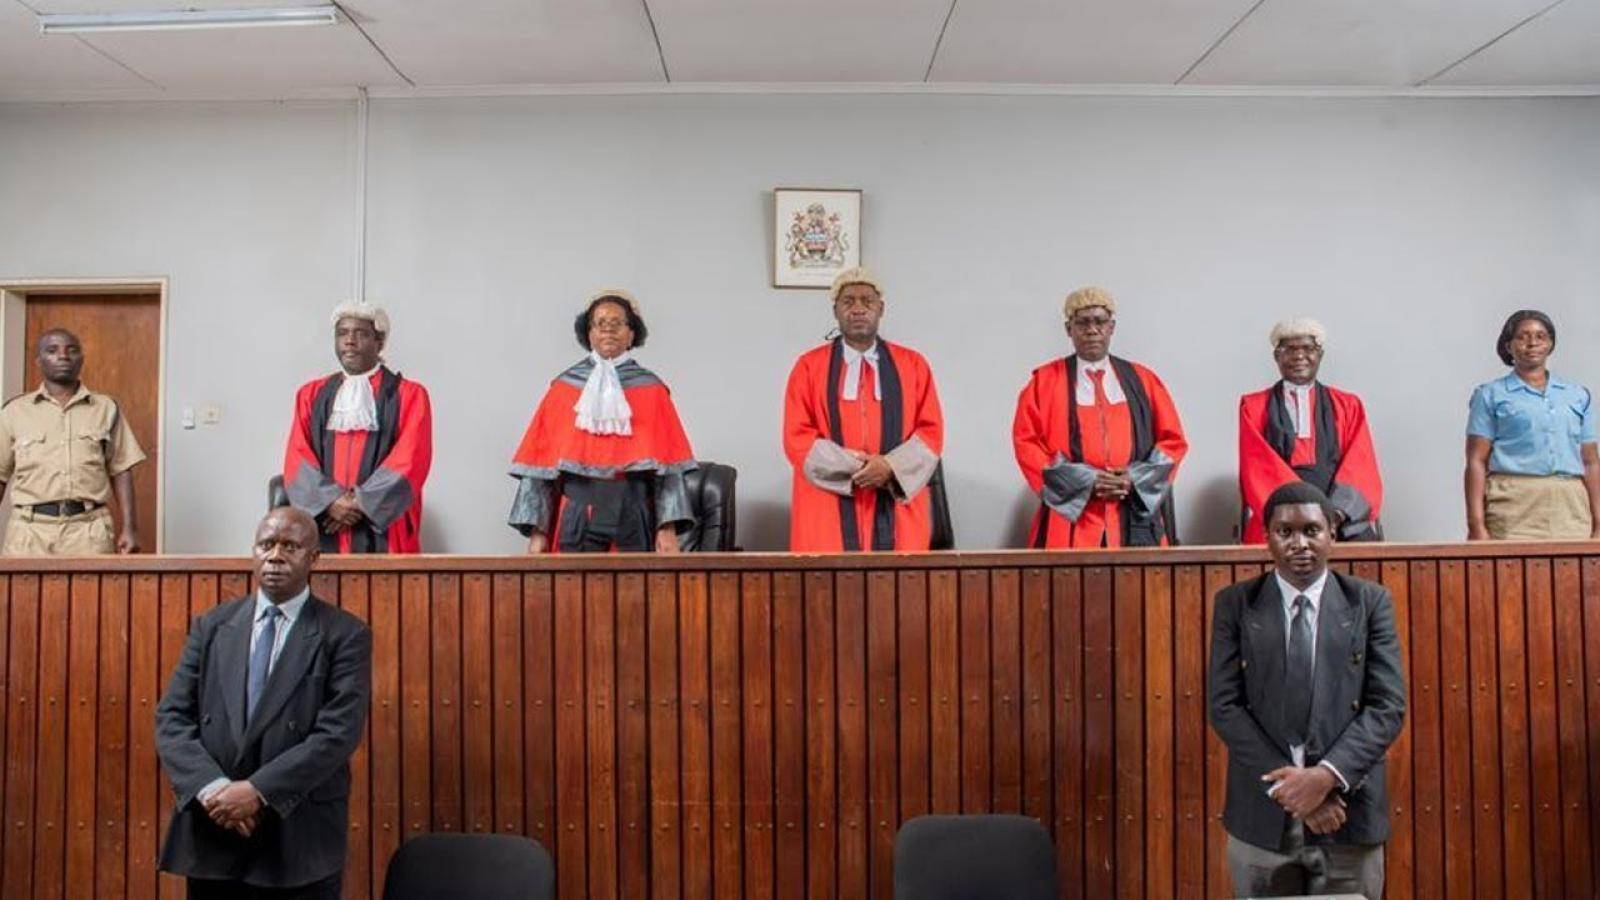 Chatham House Prize: Malawi Judges Win for Election Work | Chatham House – International Affairs Think Tank